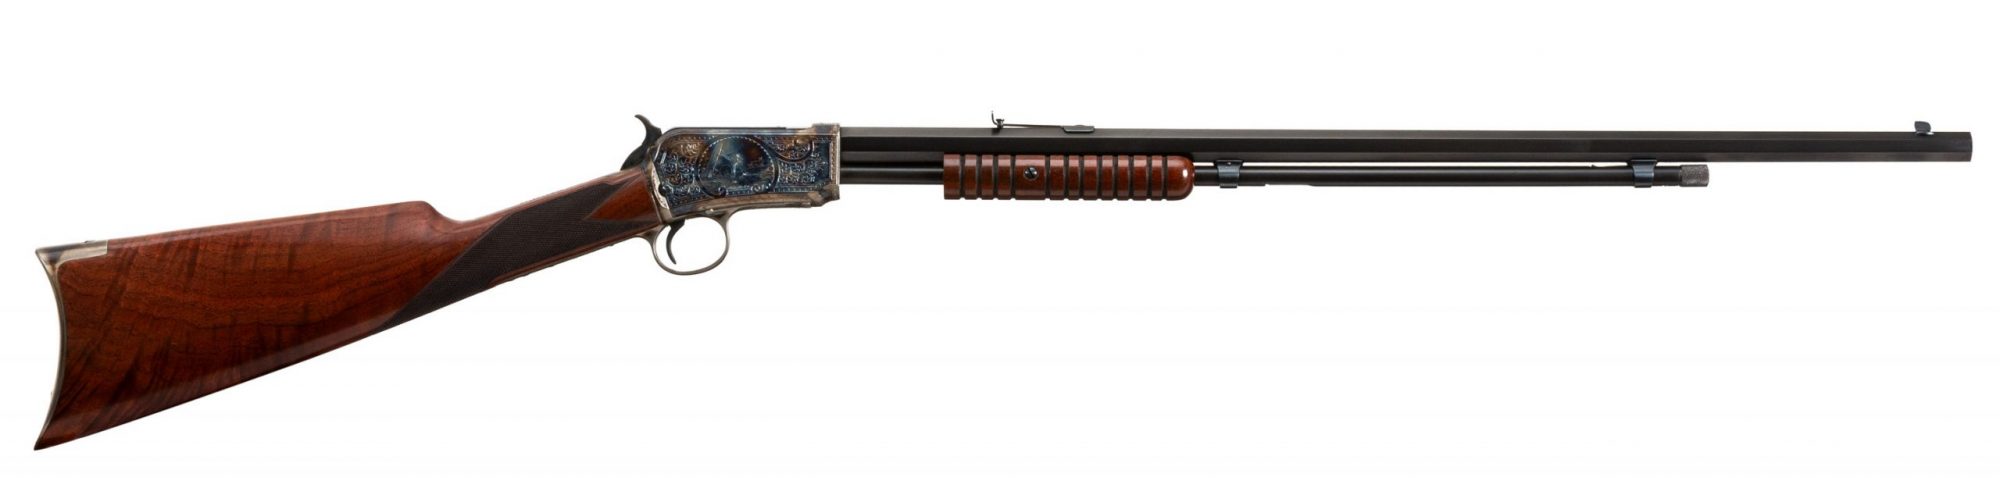 Photo of a restored and upgraded Winchester Model 1890, by Turnbull Restoration of Bloomfield, NY